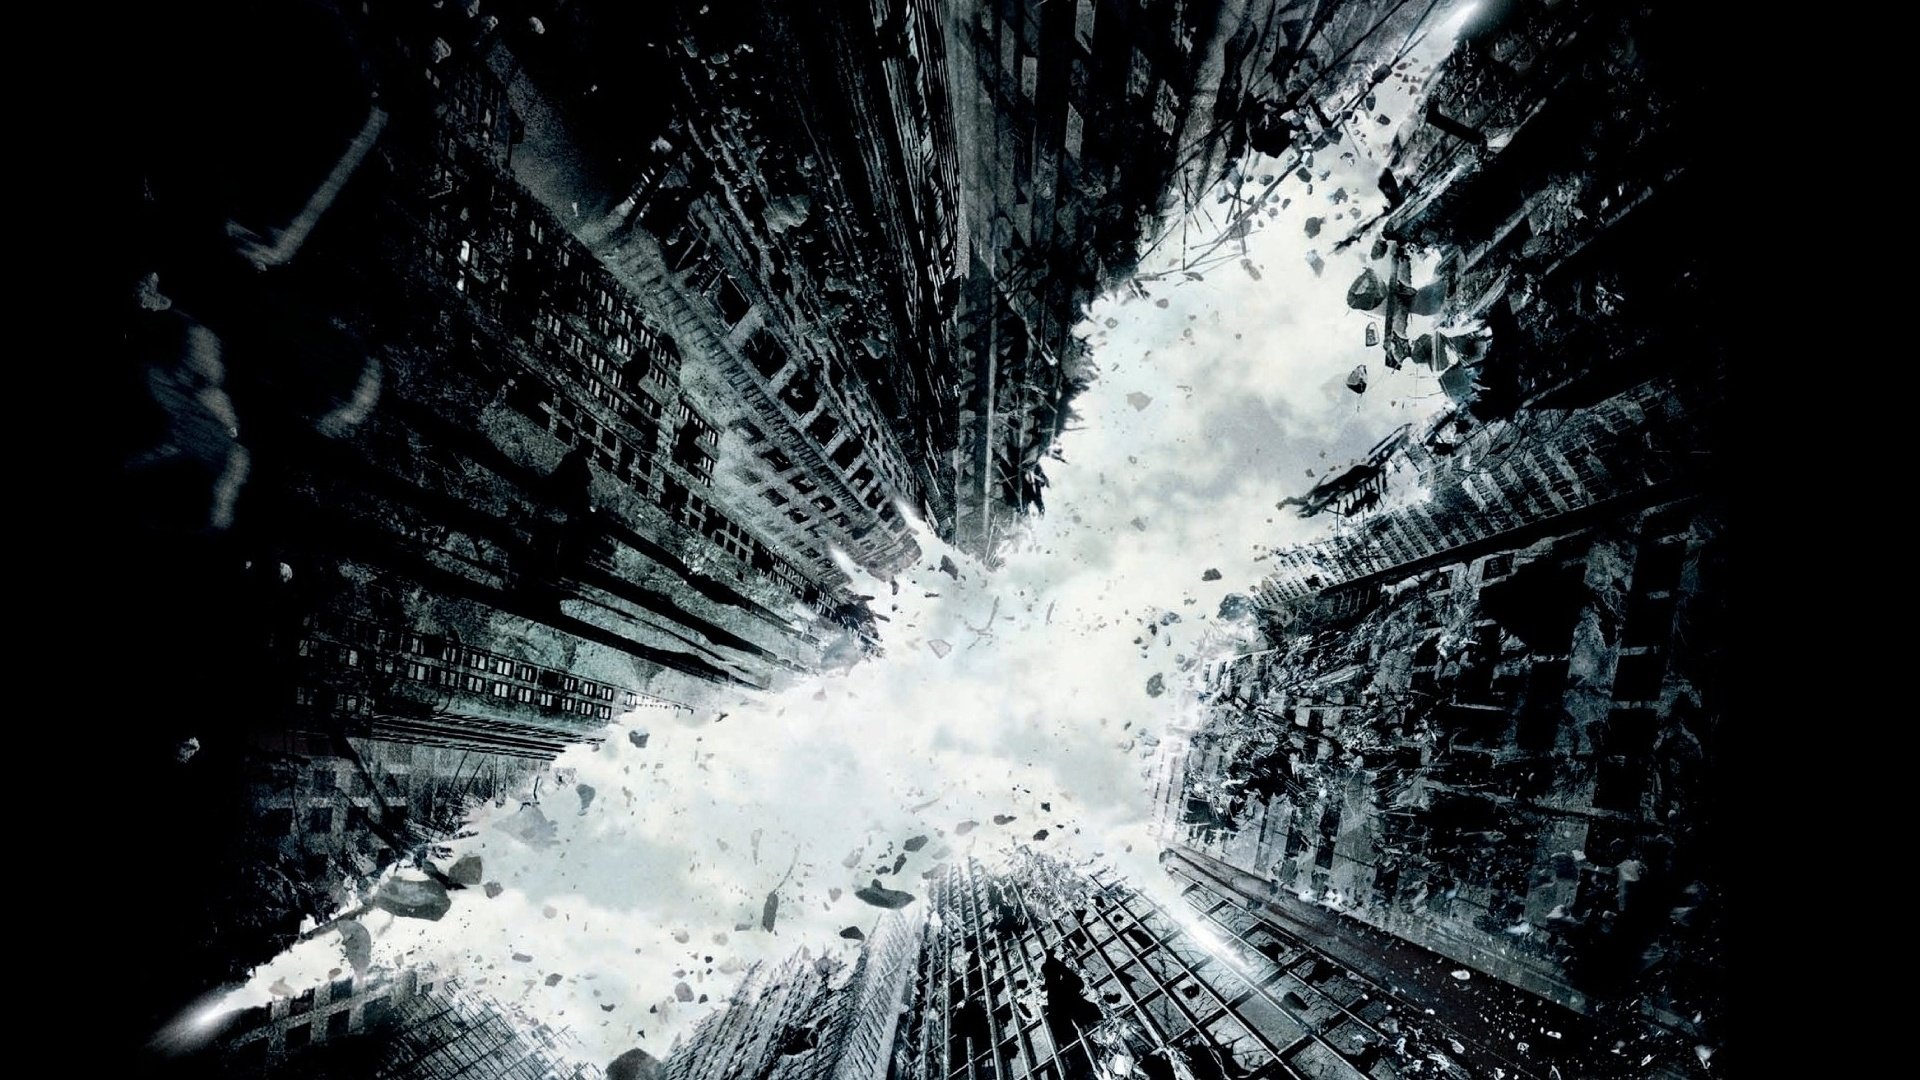  The Dark Knight Rises HD Wallpapers Backgrounds Wallpaper 